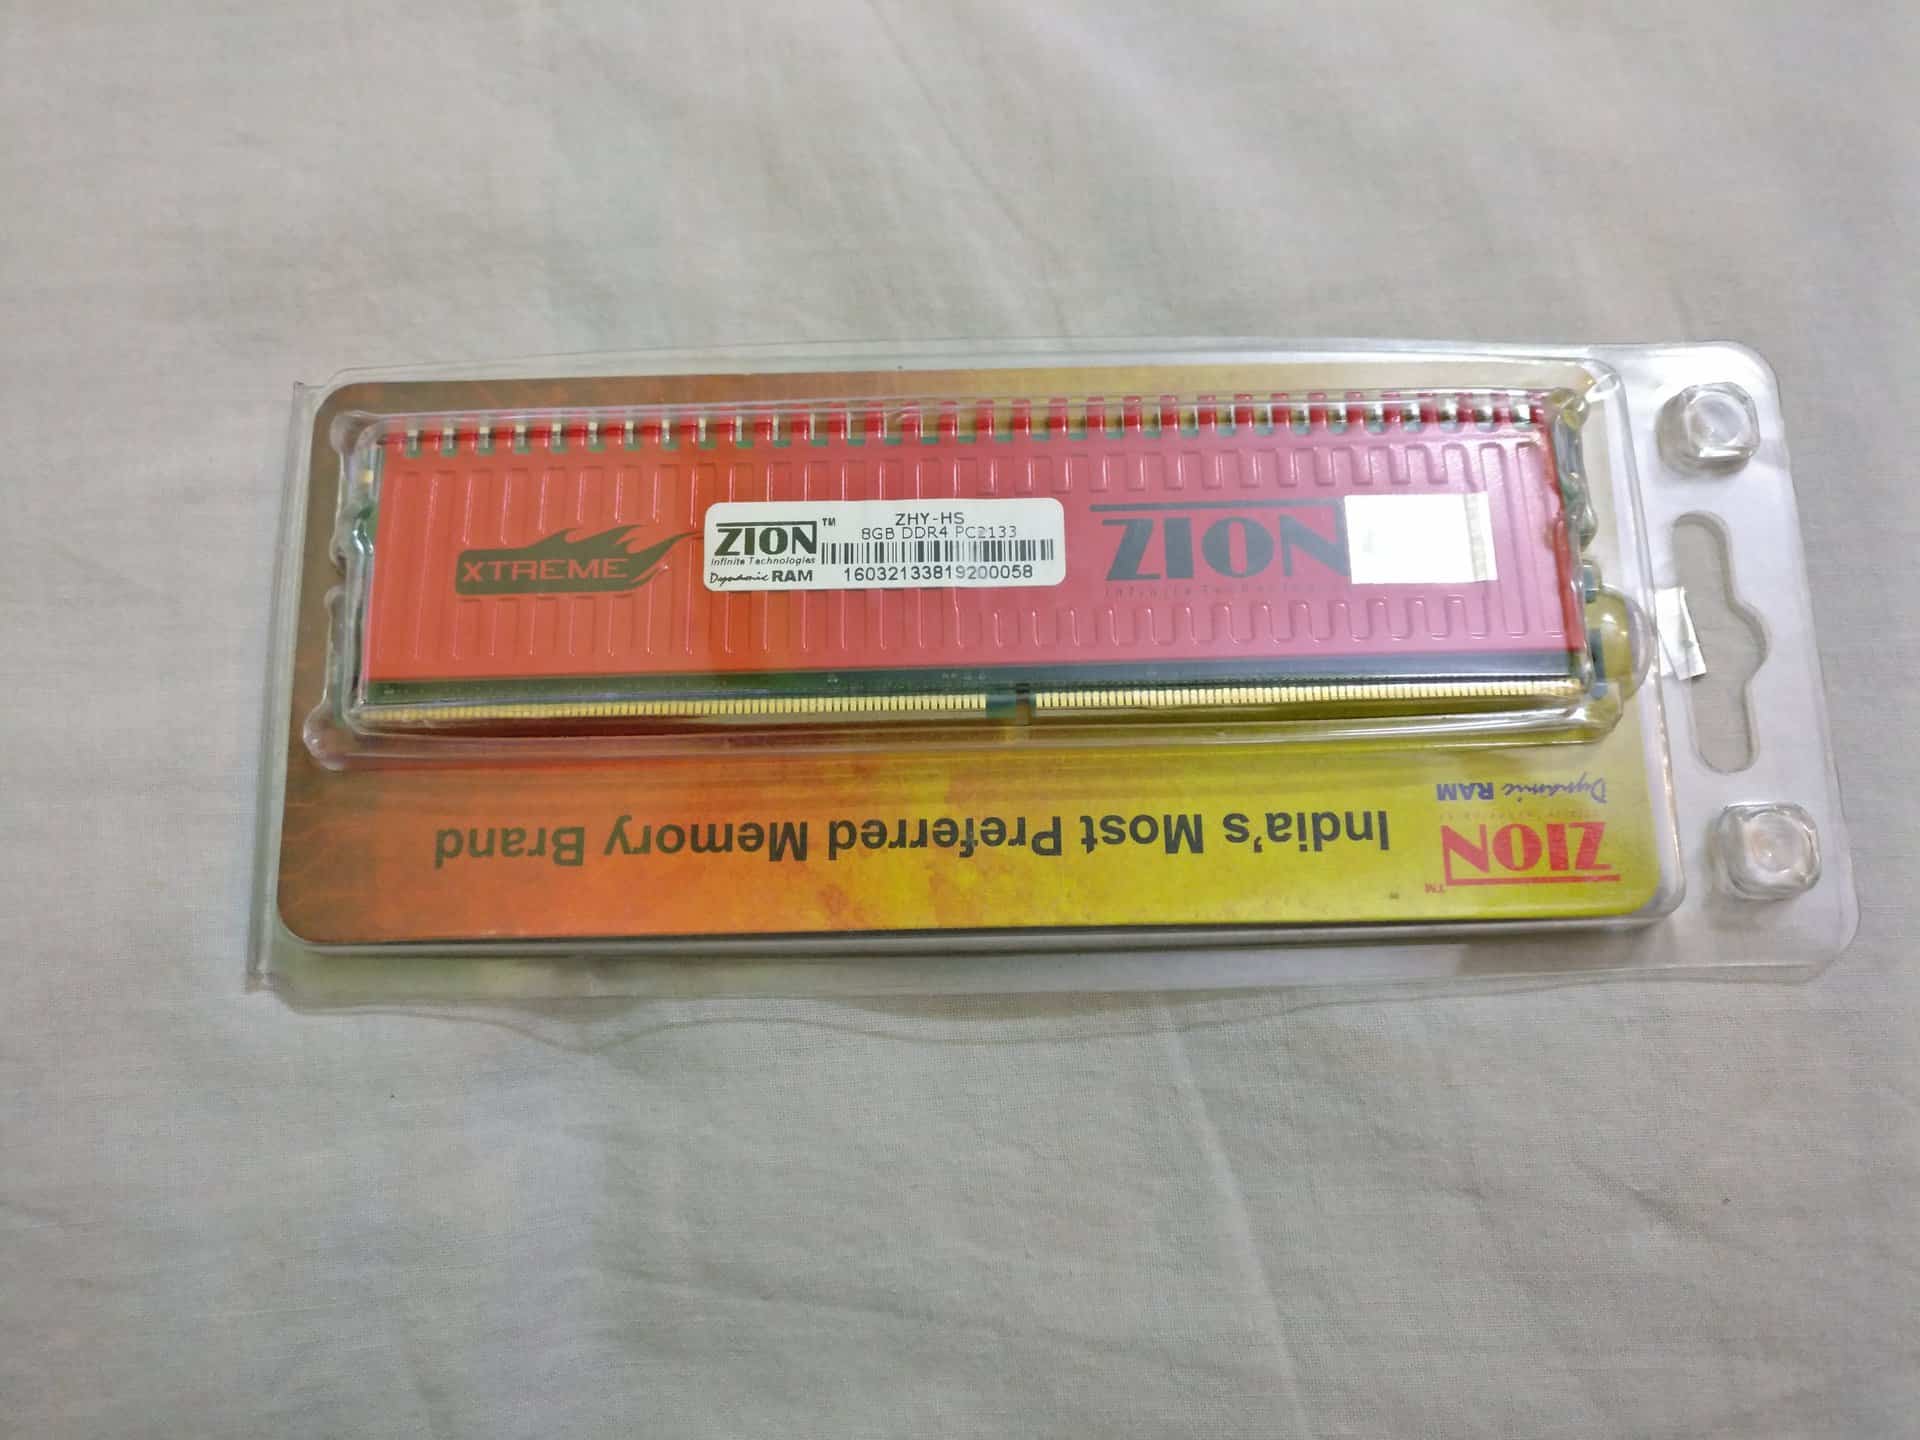 ZION Xtreme 8GB DDR4 2133 MHz RAM Packaging